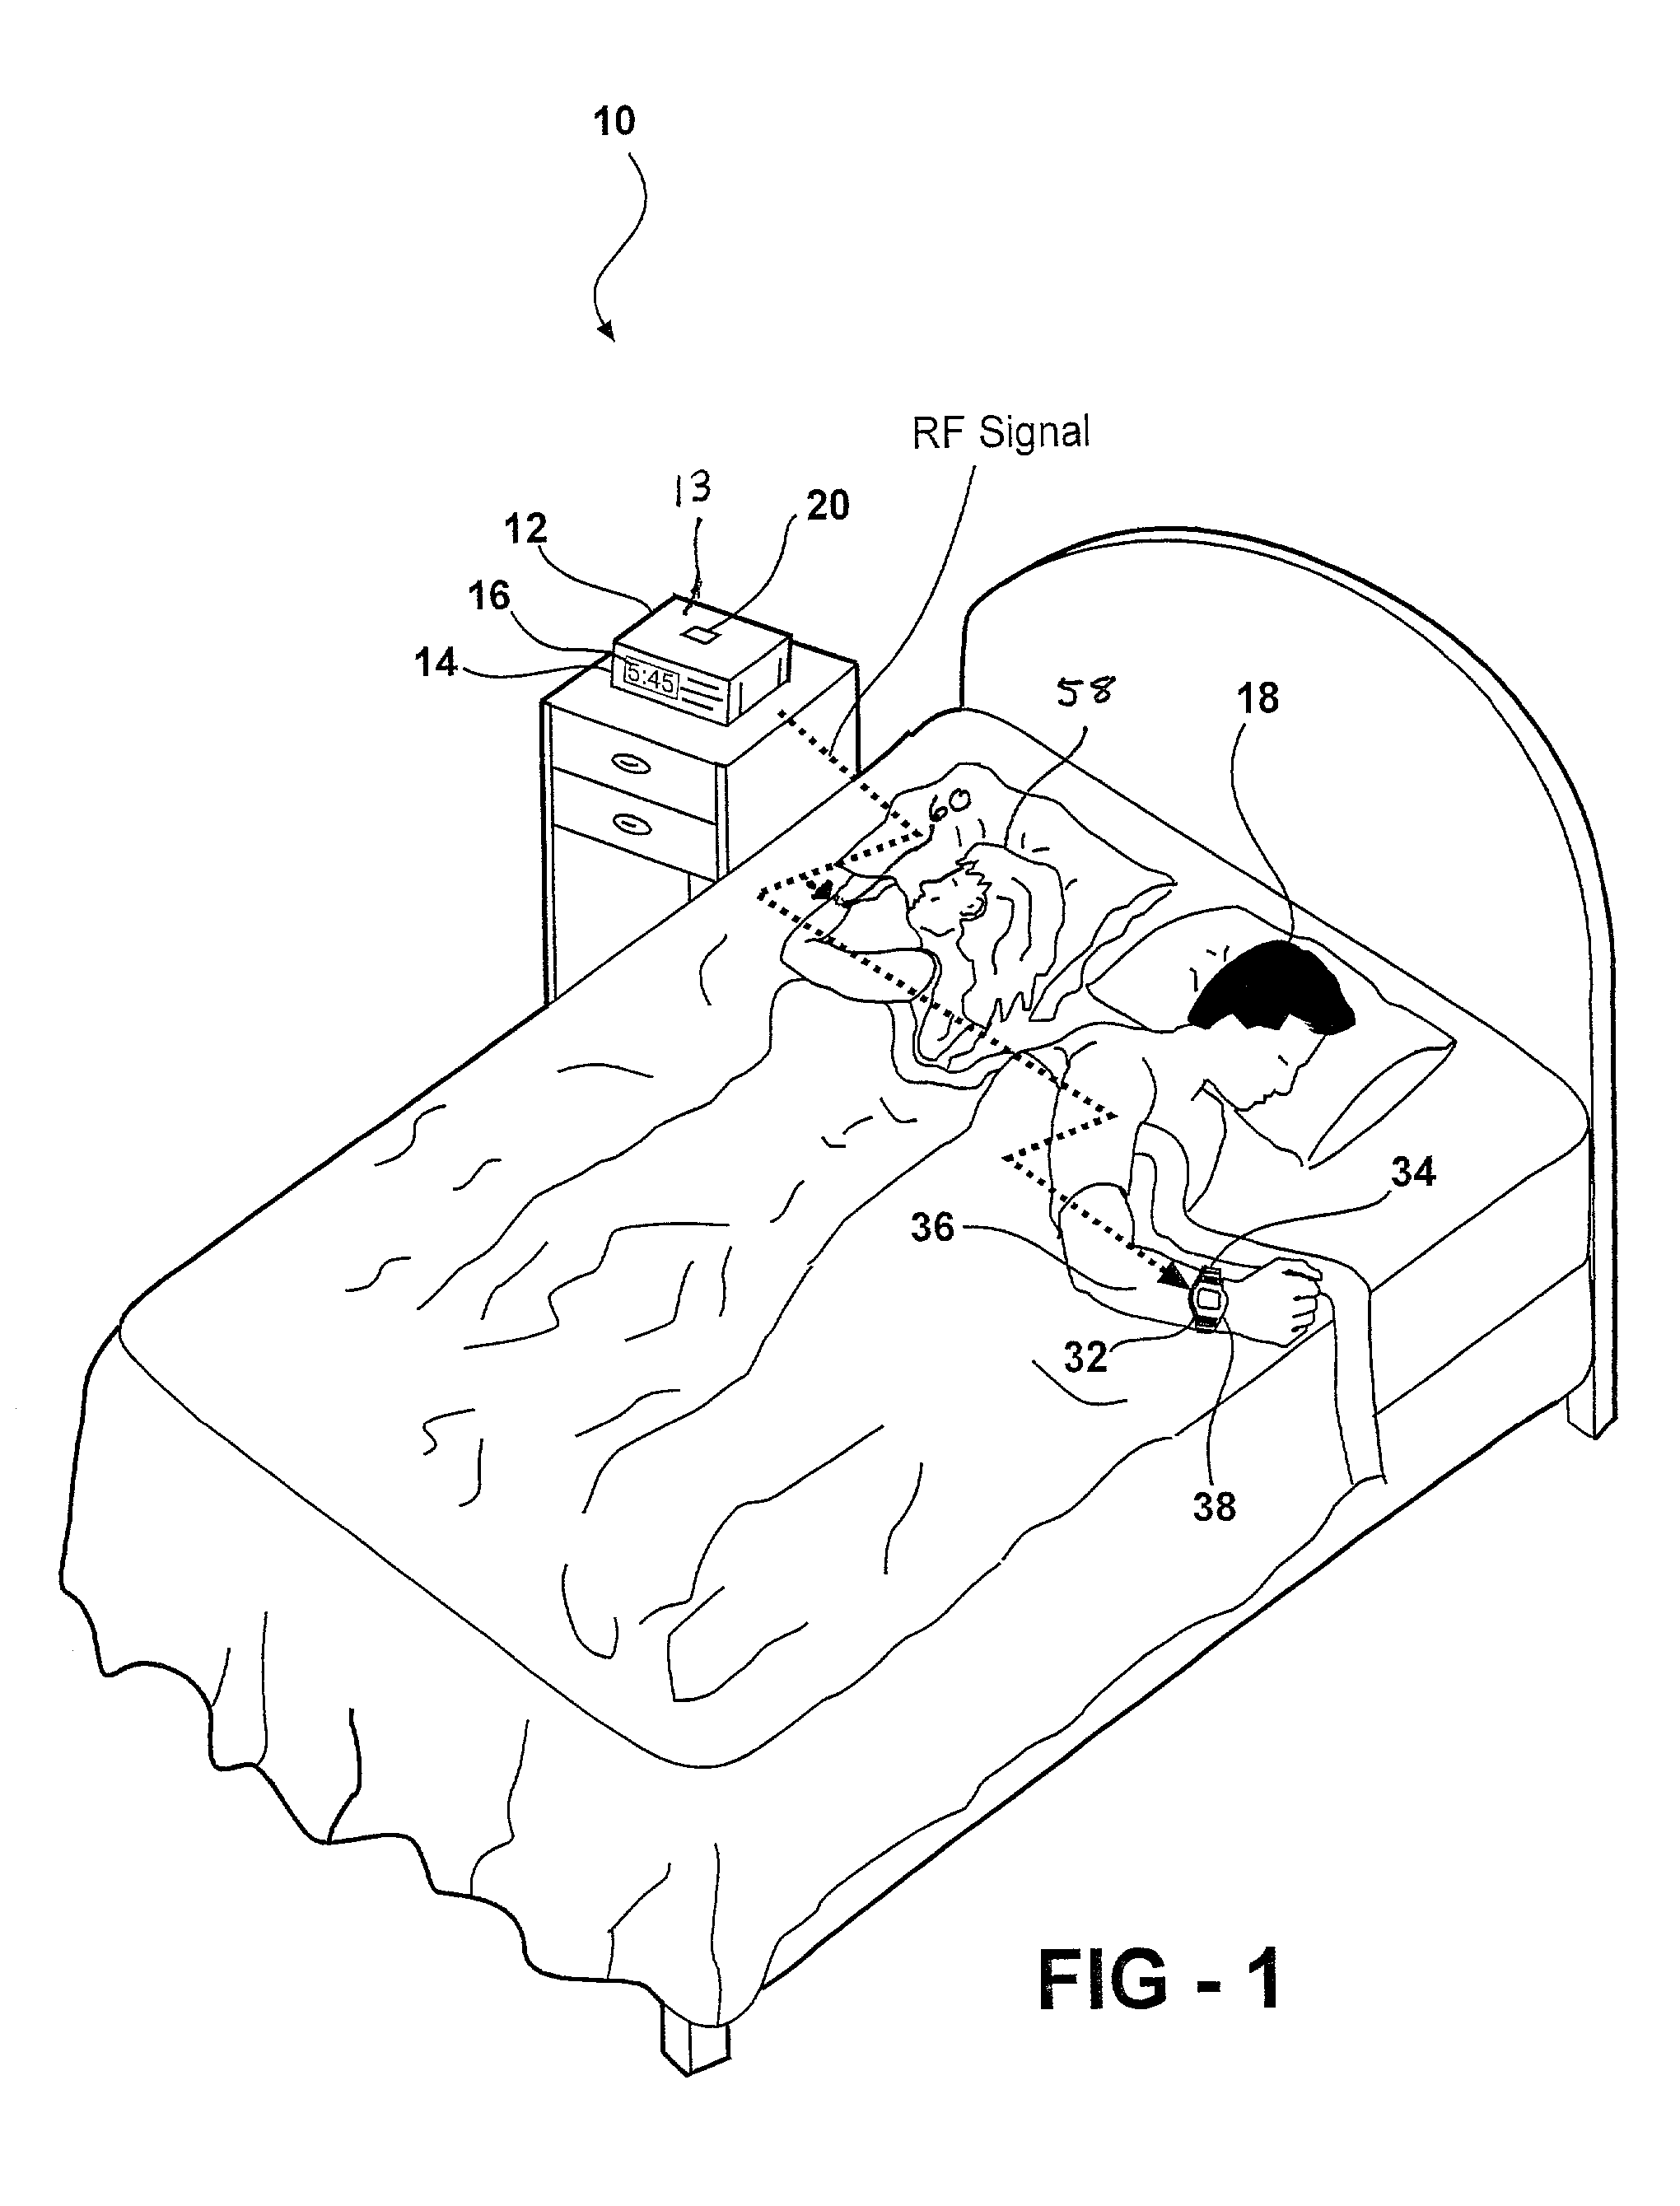 System and method of silent alarm